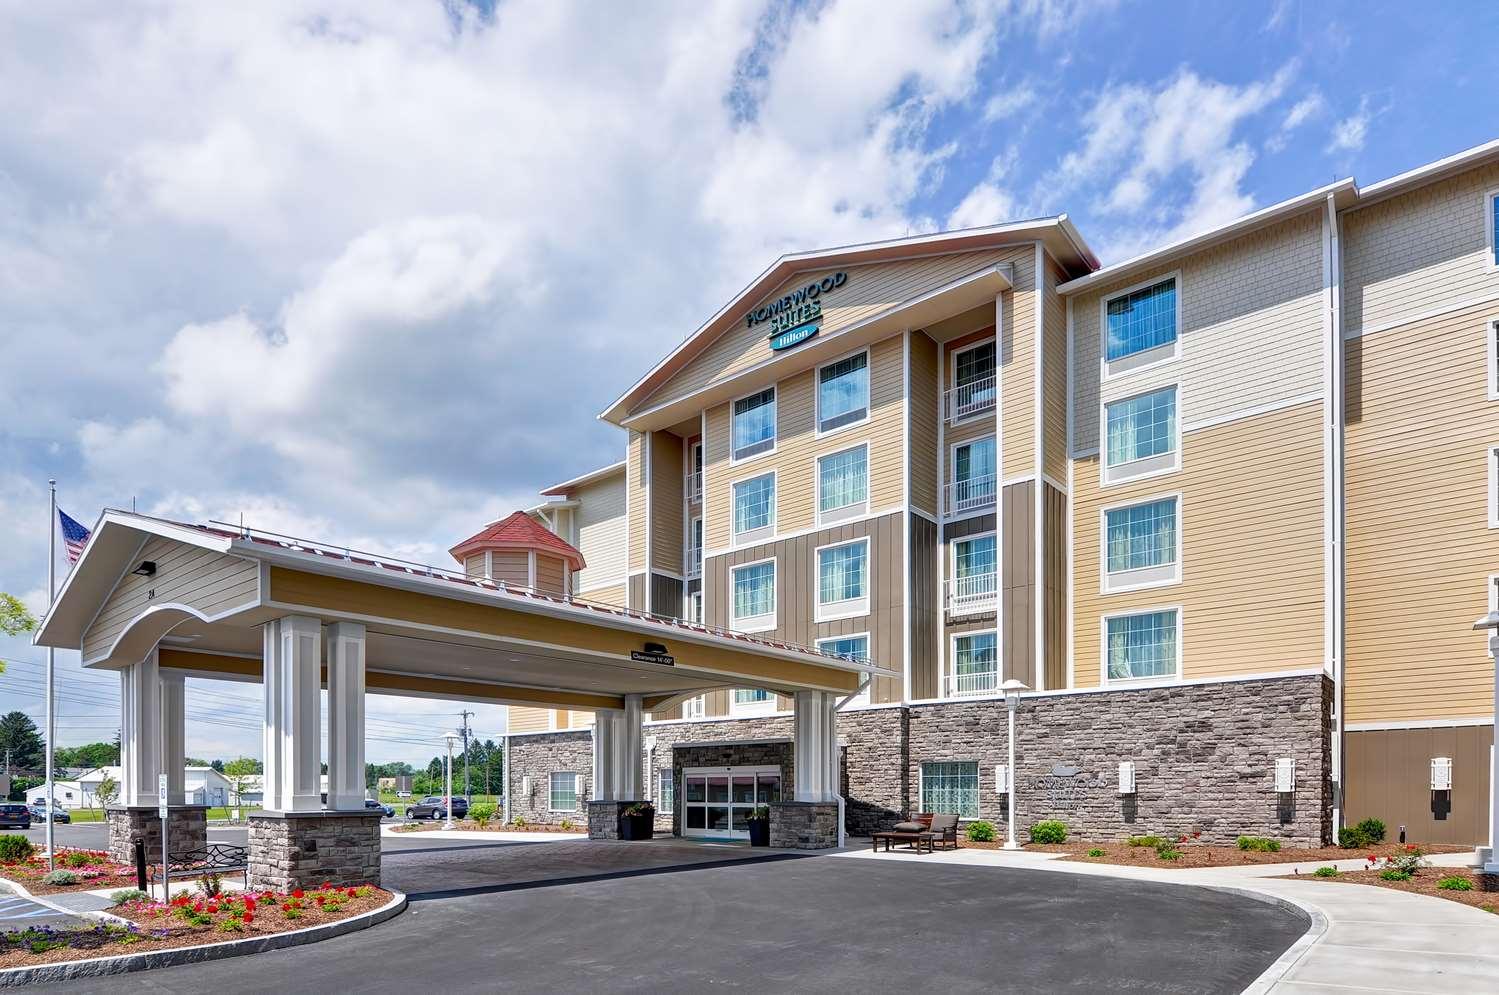 Homewood Suites by Hilton Schenectady in Schenectady, NY